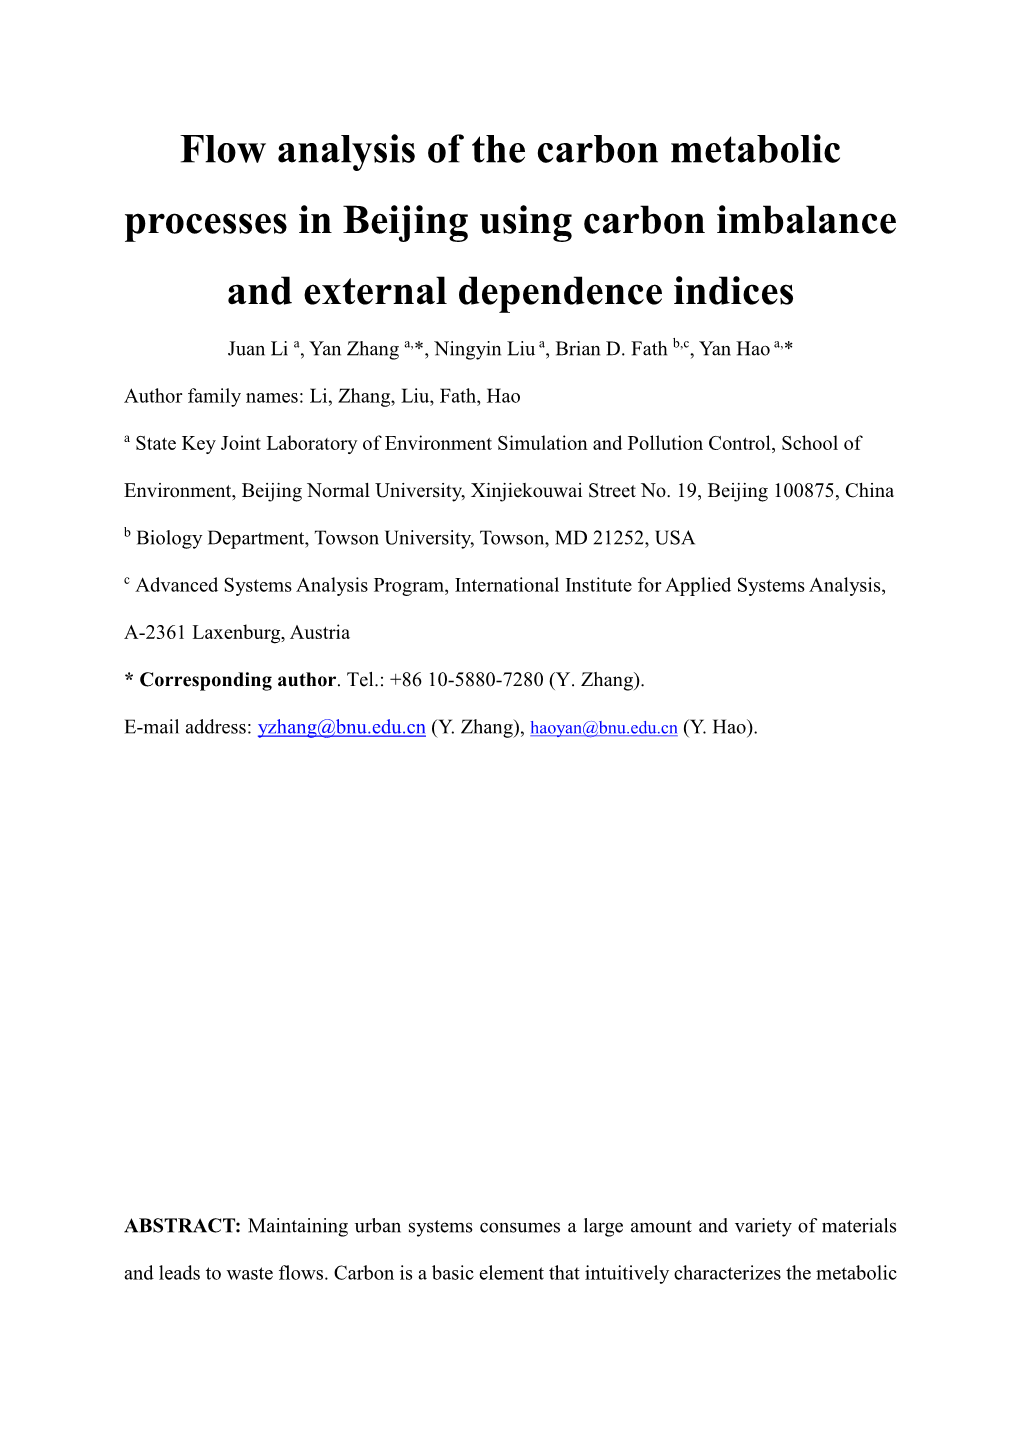 Flow Analysis of the Carbon Metabolic Processes in Beijing Using Carbon Imbalance and External Dependence Indices